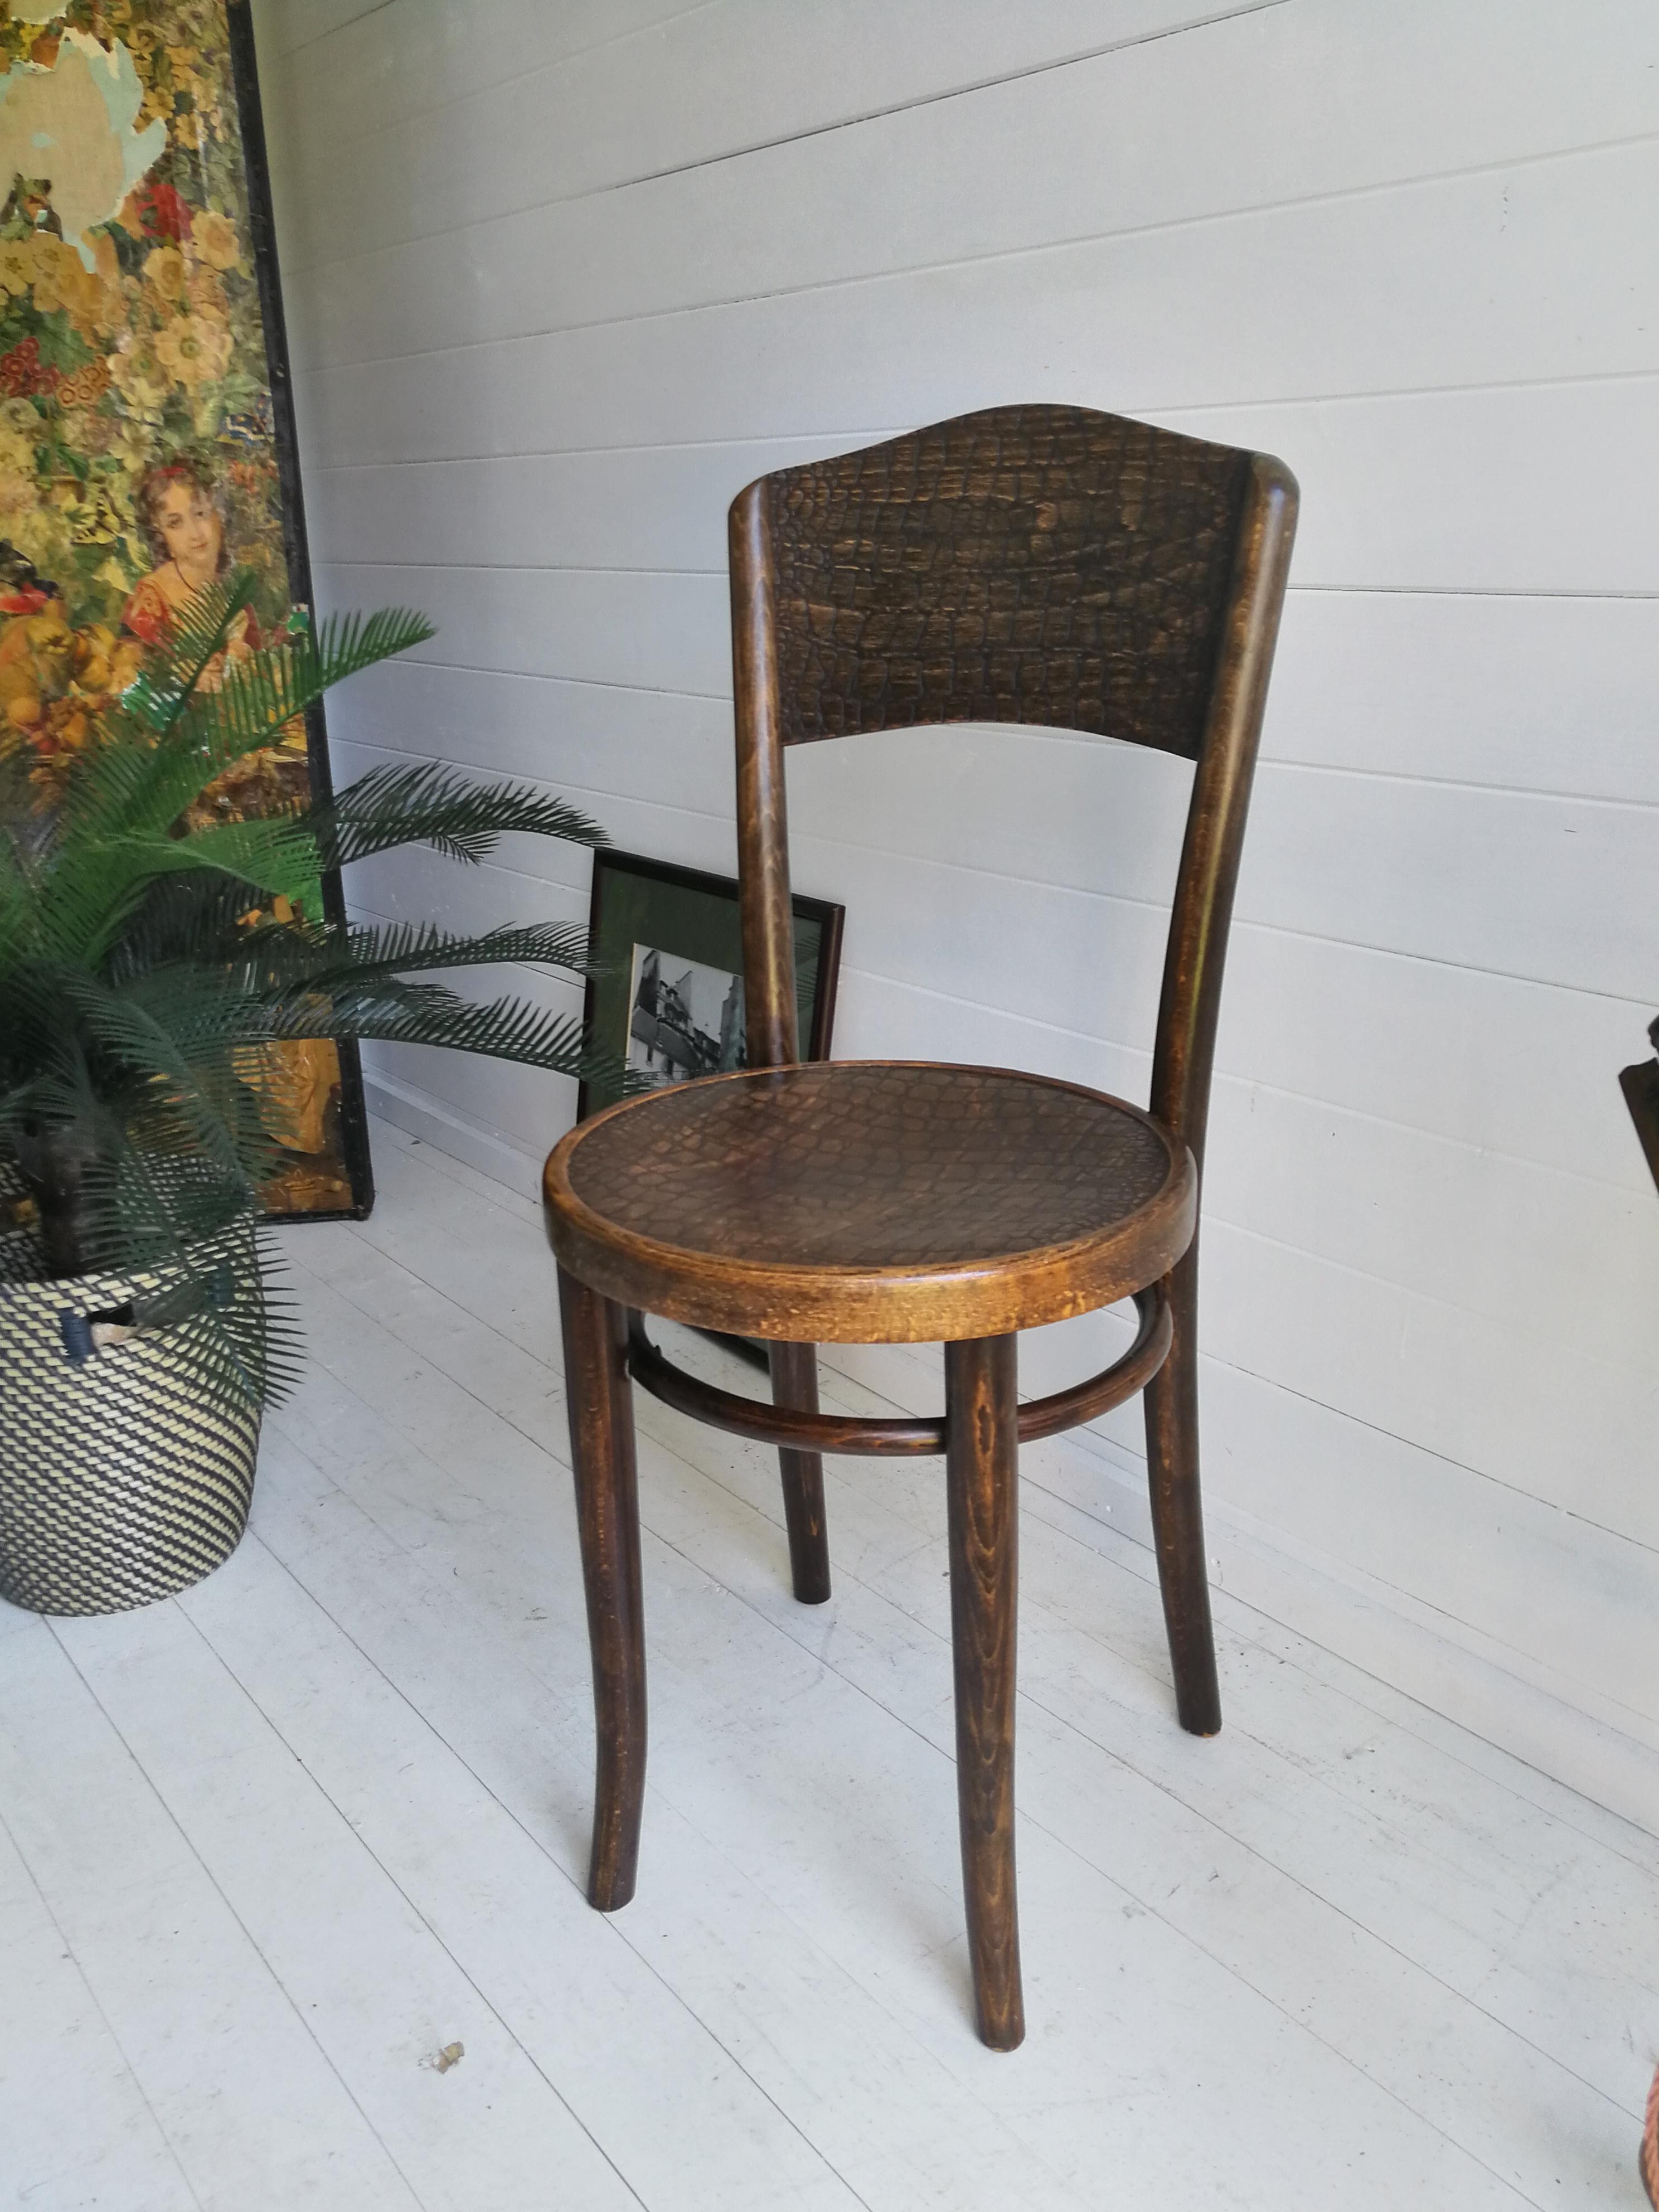 Thonet Classic Bentwood Bistro Chair with rare crocodile pattern ~~~
These bentwood dining 'bistro' chairs by Thonet have a striking crocodile embossed design on the seat and backrest - a fantastic feature that really sets them apart.
The chair were